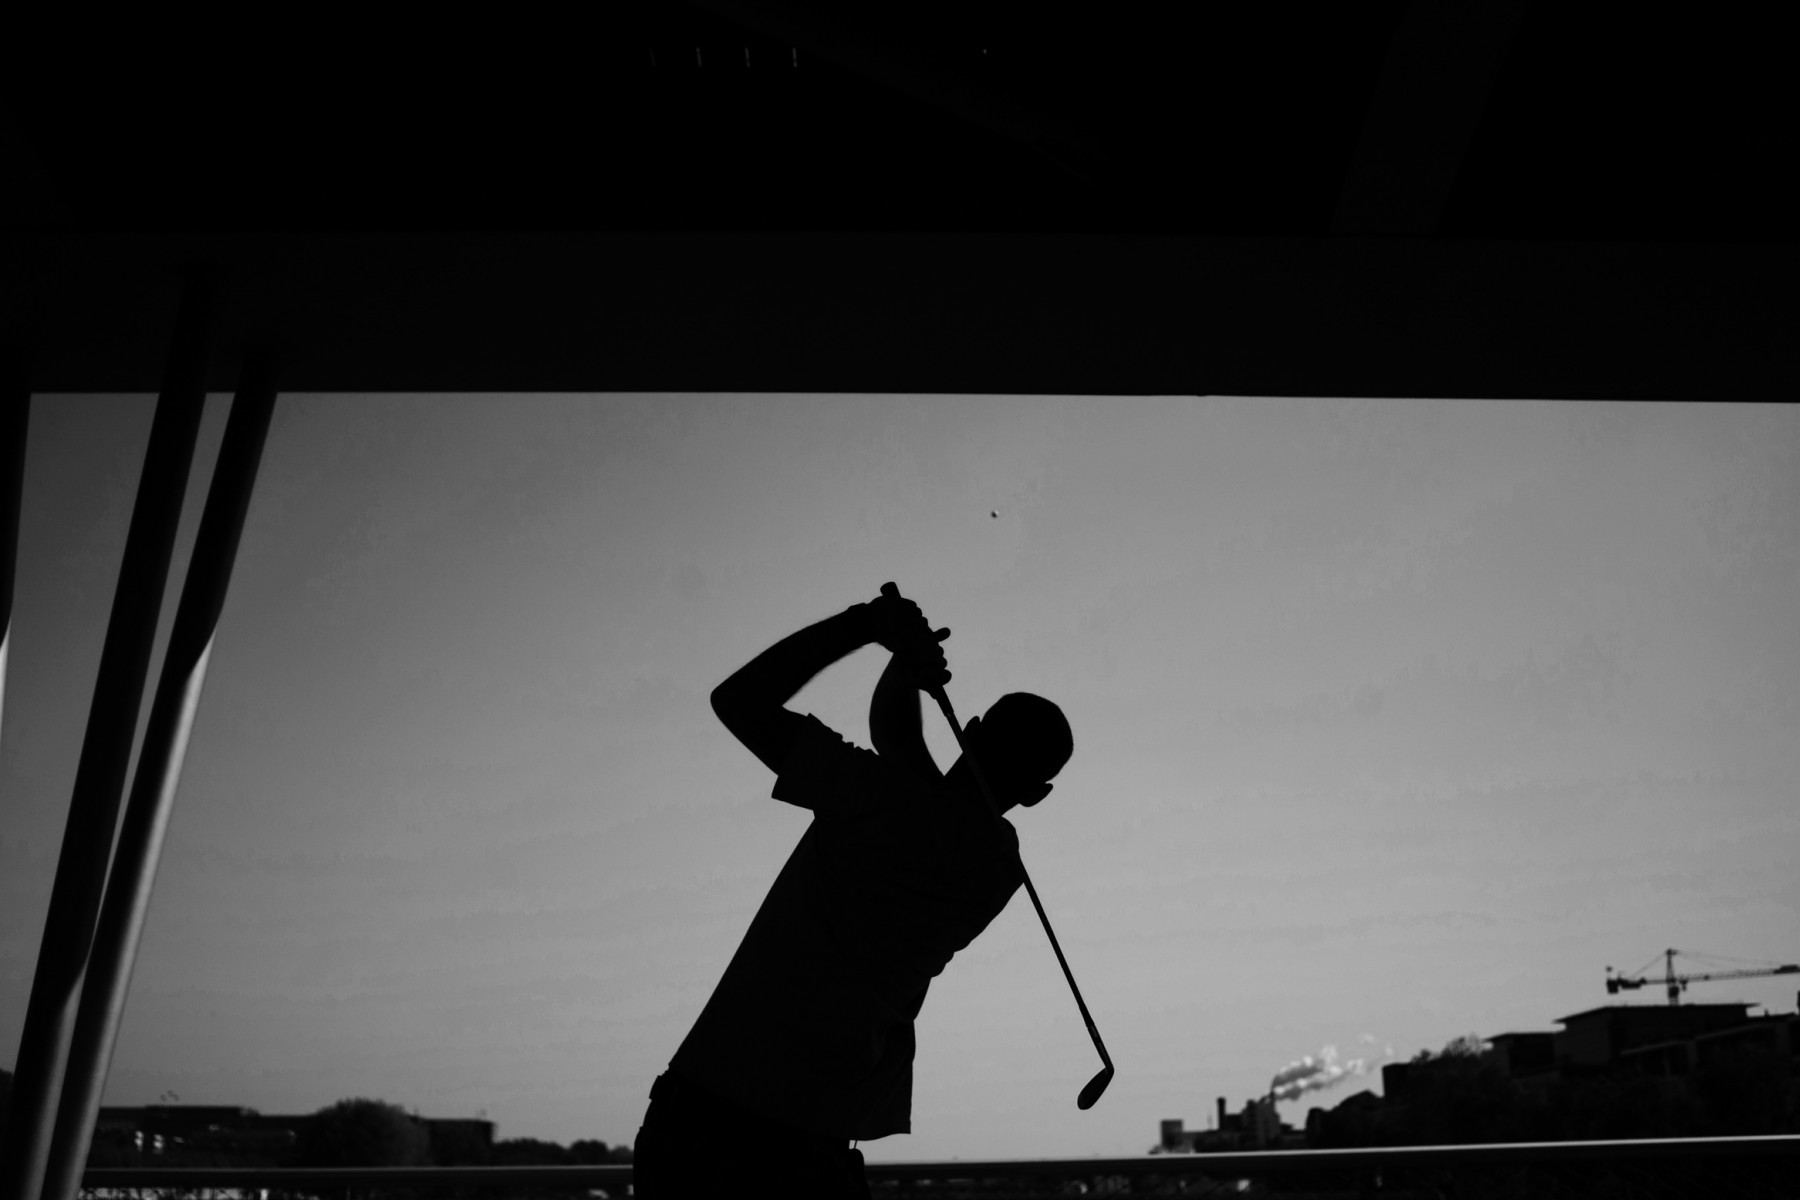 Let's Play, a transmedia project about urban golf practice - 19e-trou-©